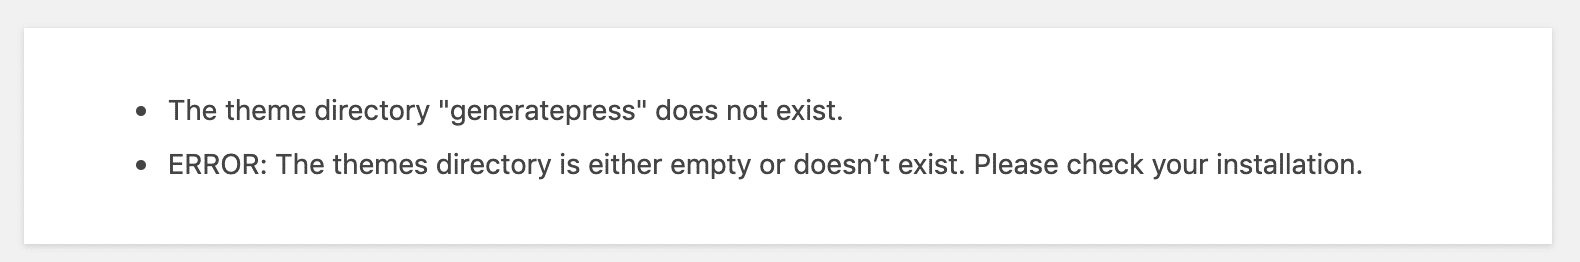 the-theme-directory-does-not-exist